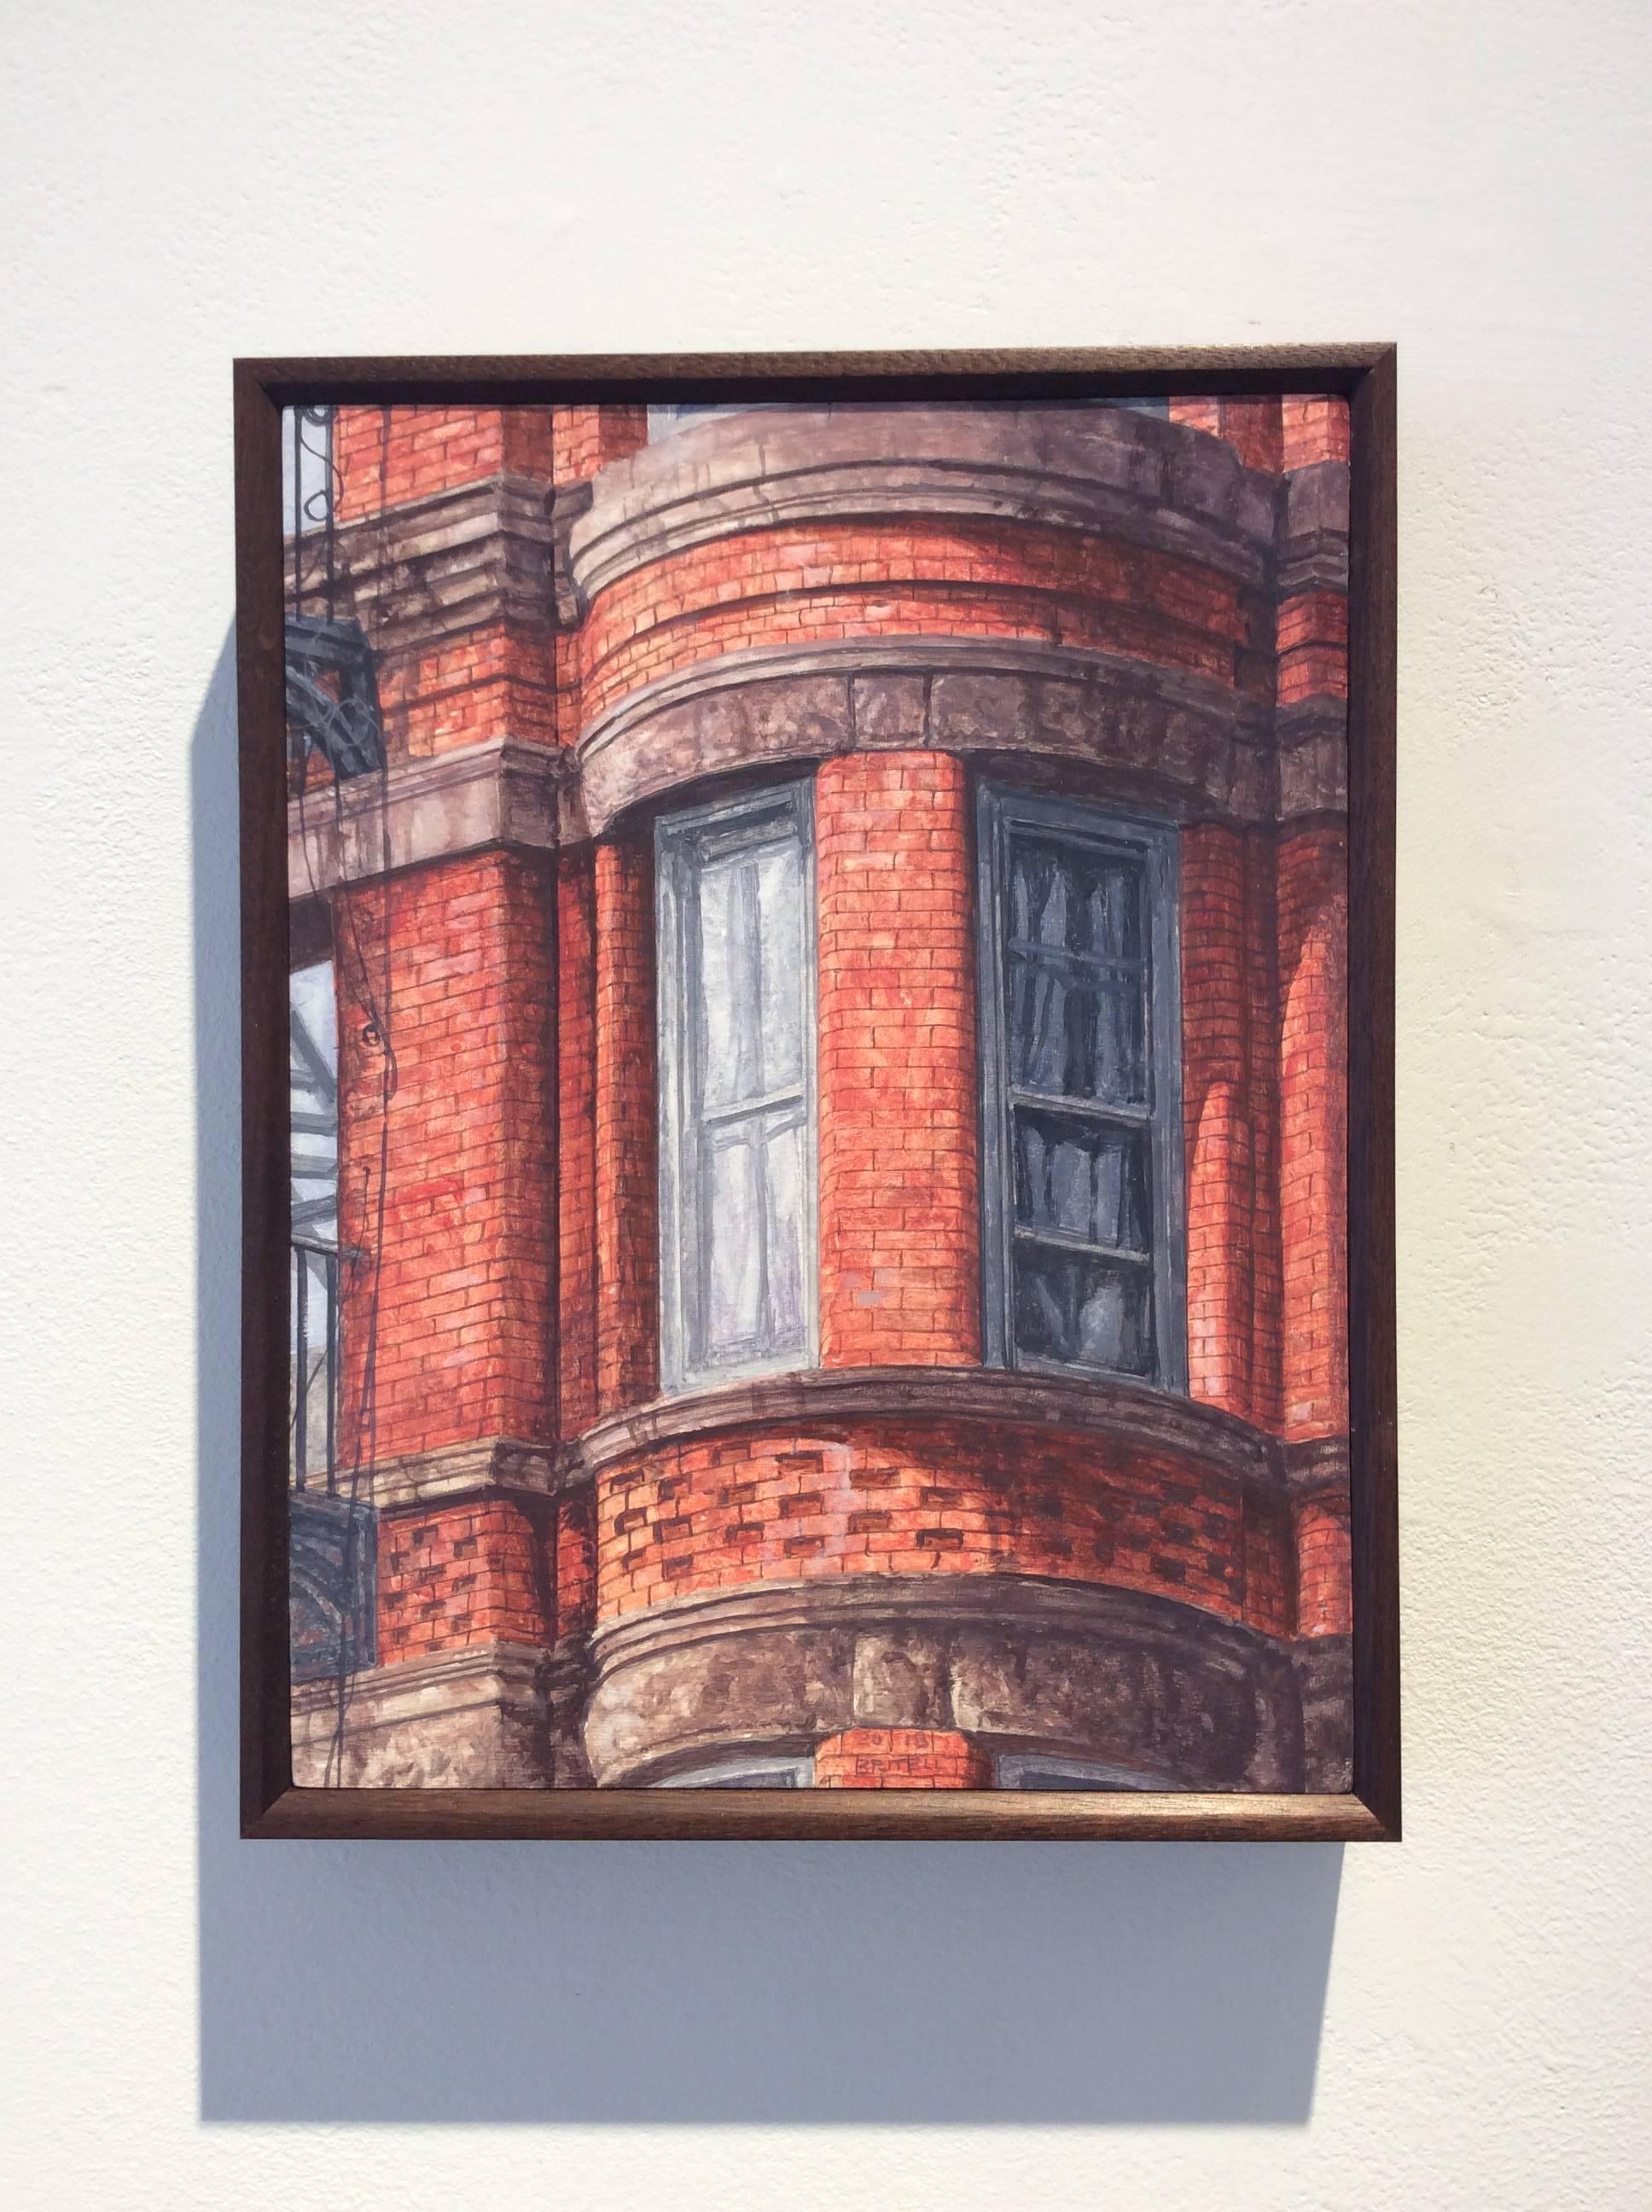 Photo-realist oil painting of New York City red brick building on West 82nd and Amsterdam Avenue.
oil on wood in artist made dark wood frame
11 x 8 inches

This contemporary, realistic oil painting of a New York City building was painted by Richard